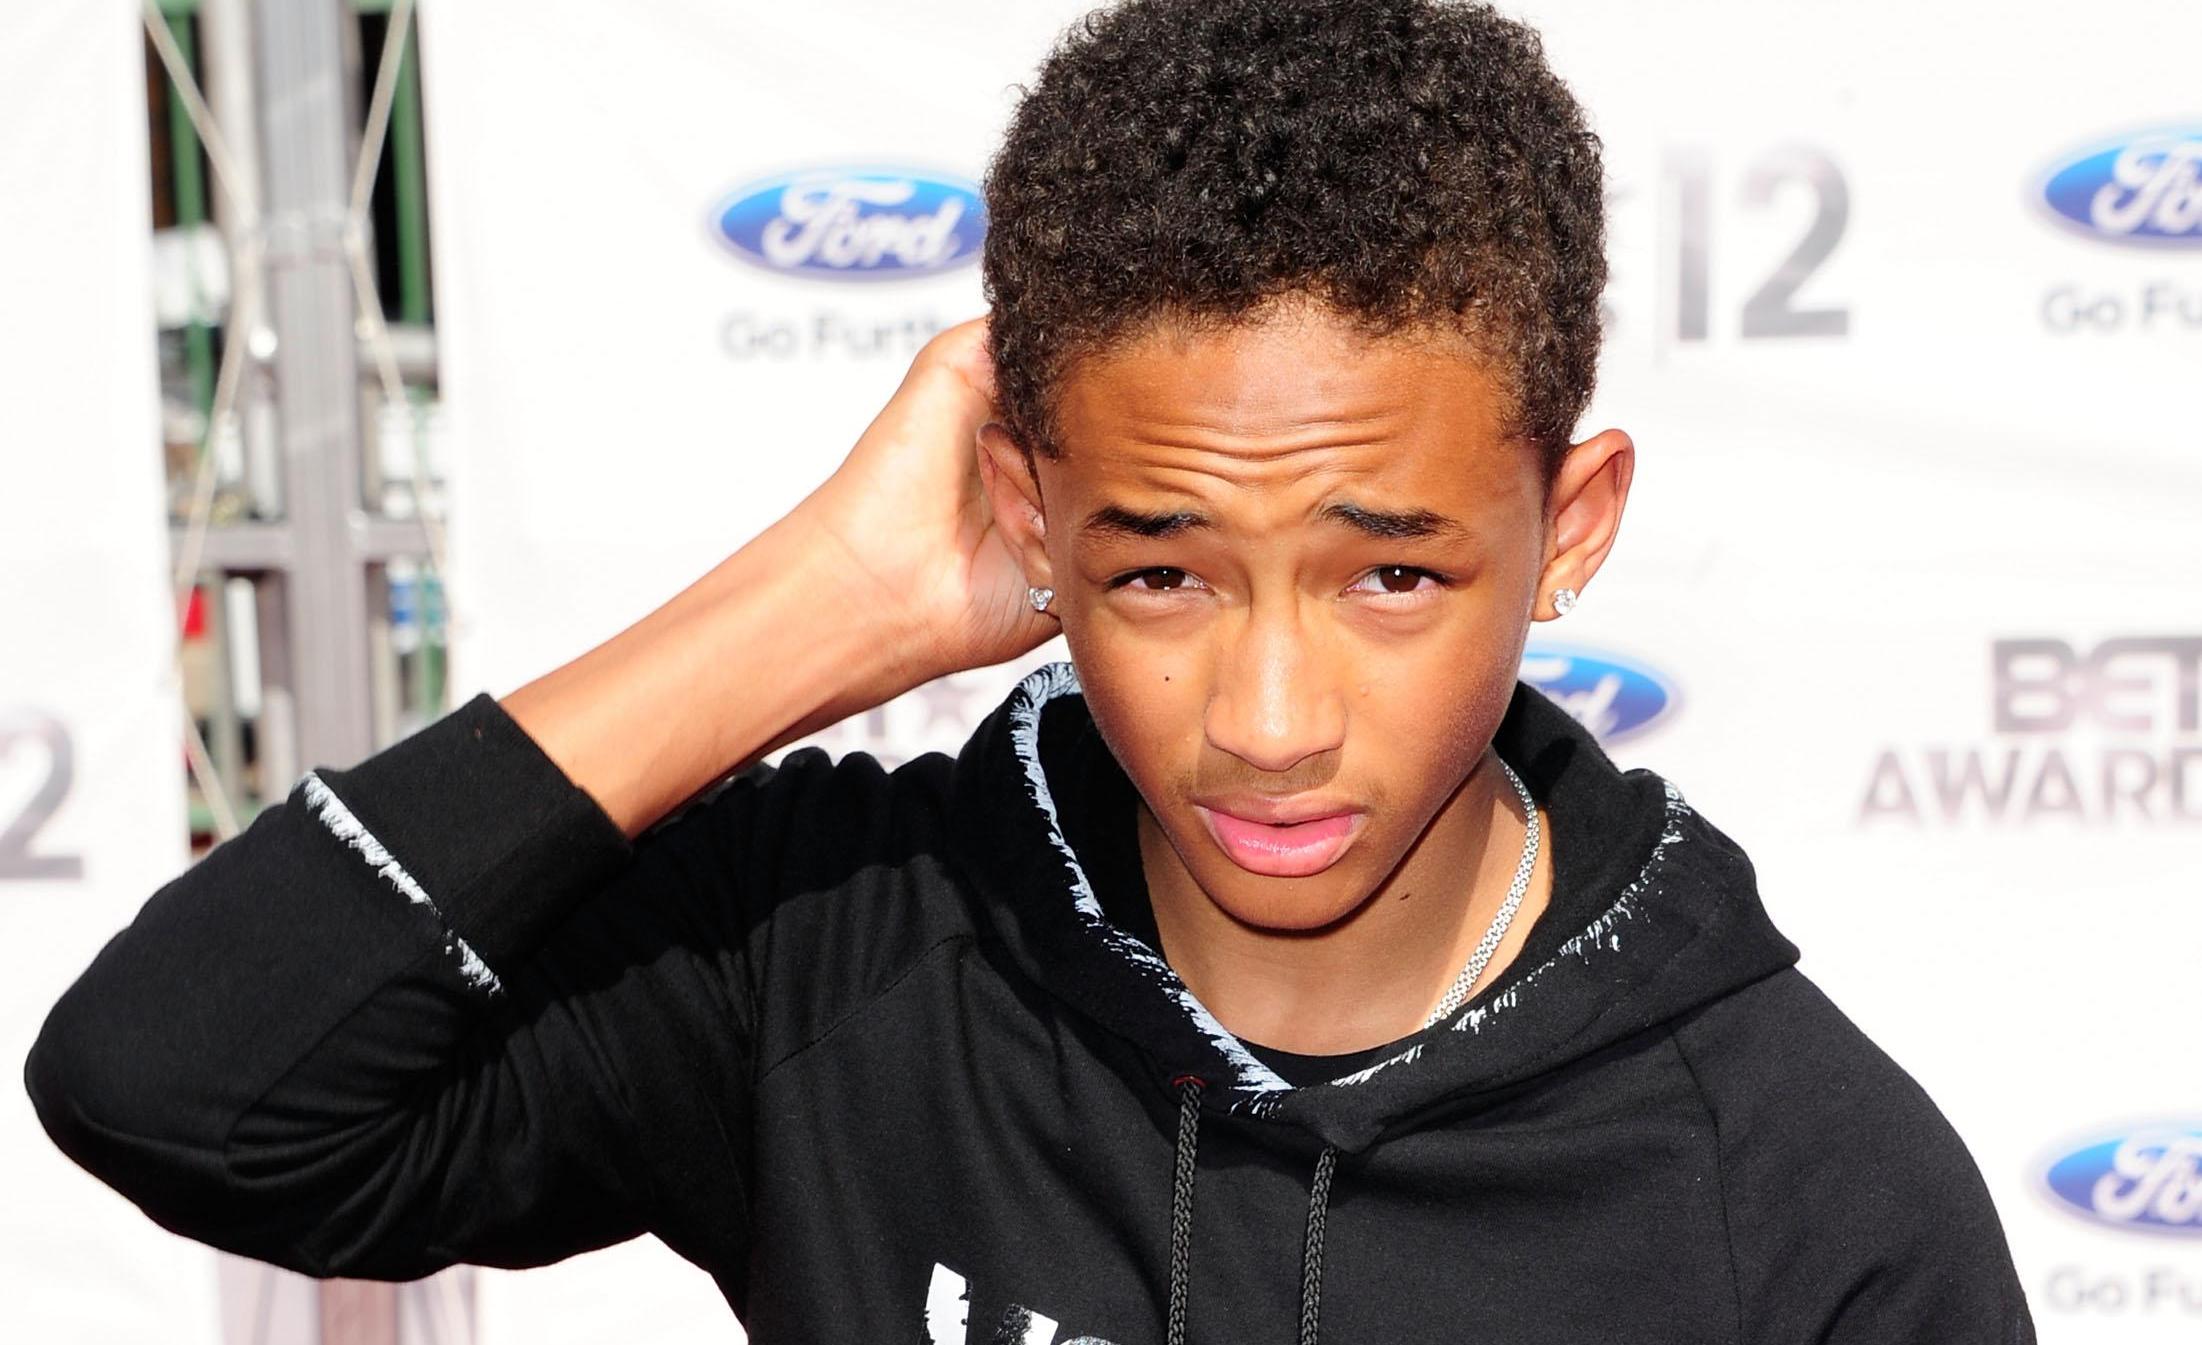 Will Smith's 16 Year-old Son Jaden Steps Out Without Pants